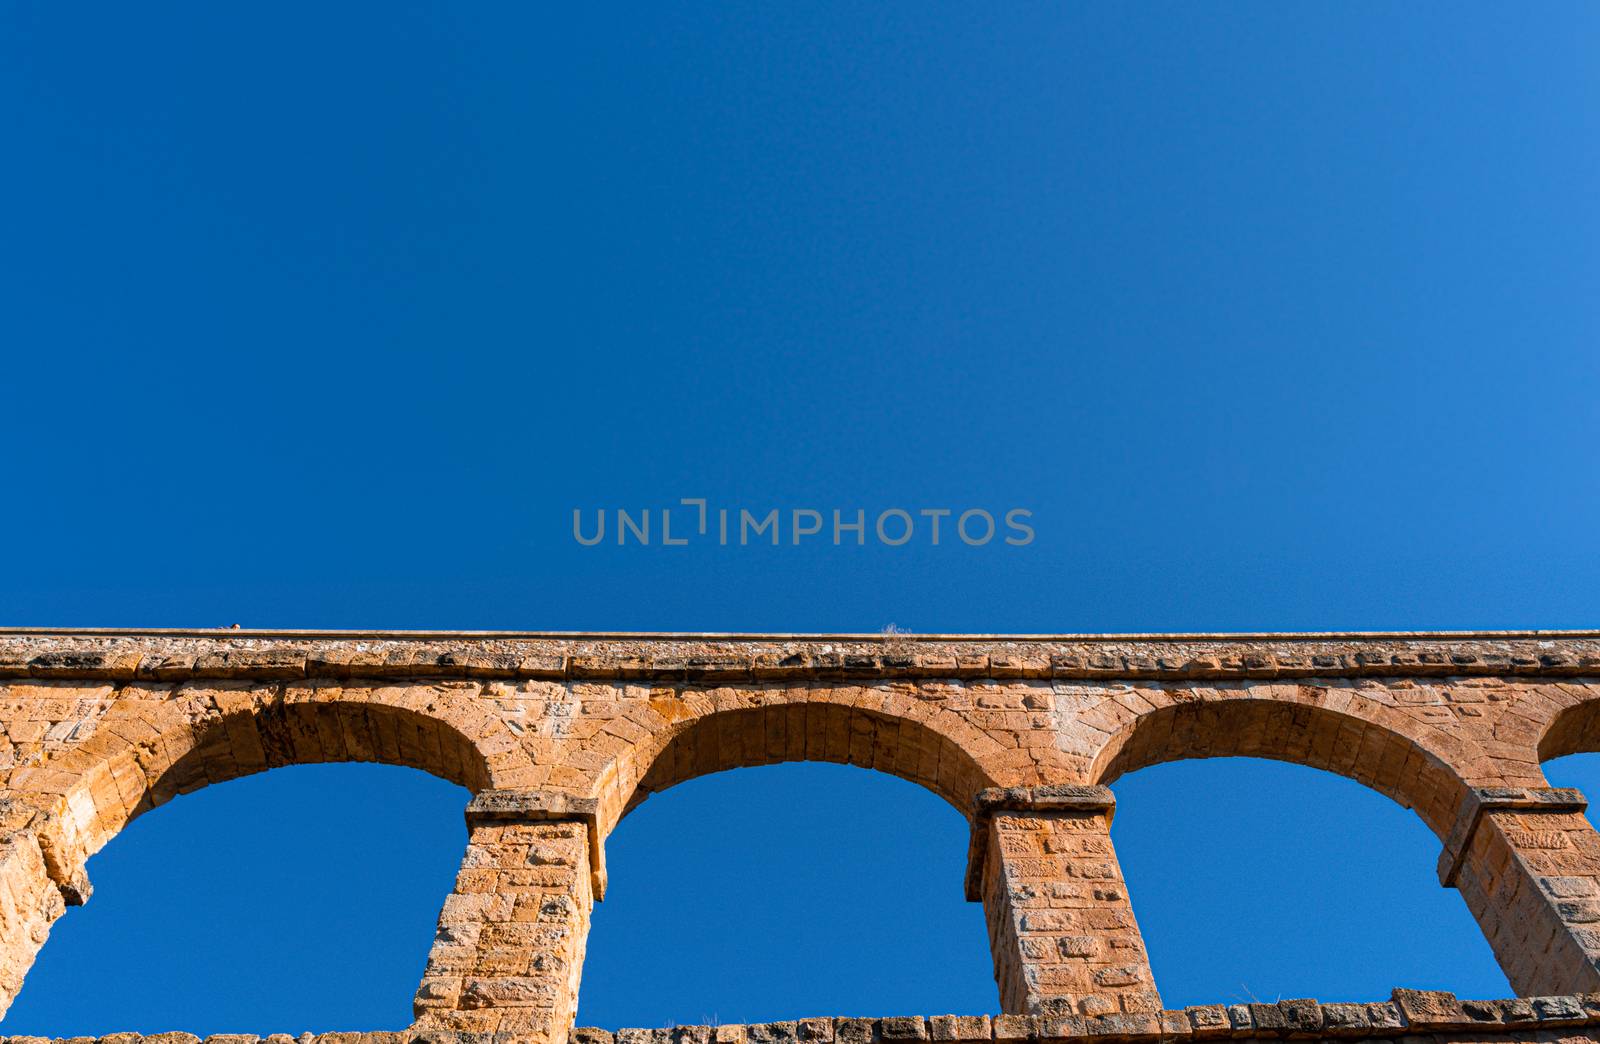 Teal and orange view of a roman aqueduct with copy space available by tanaonte